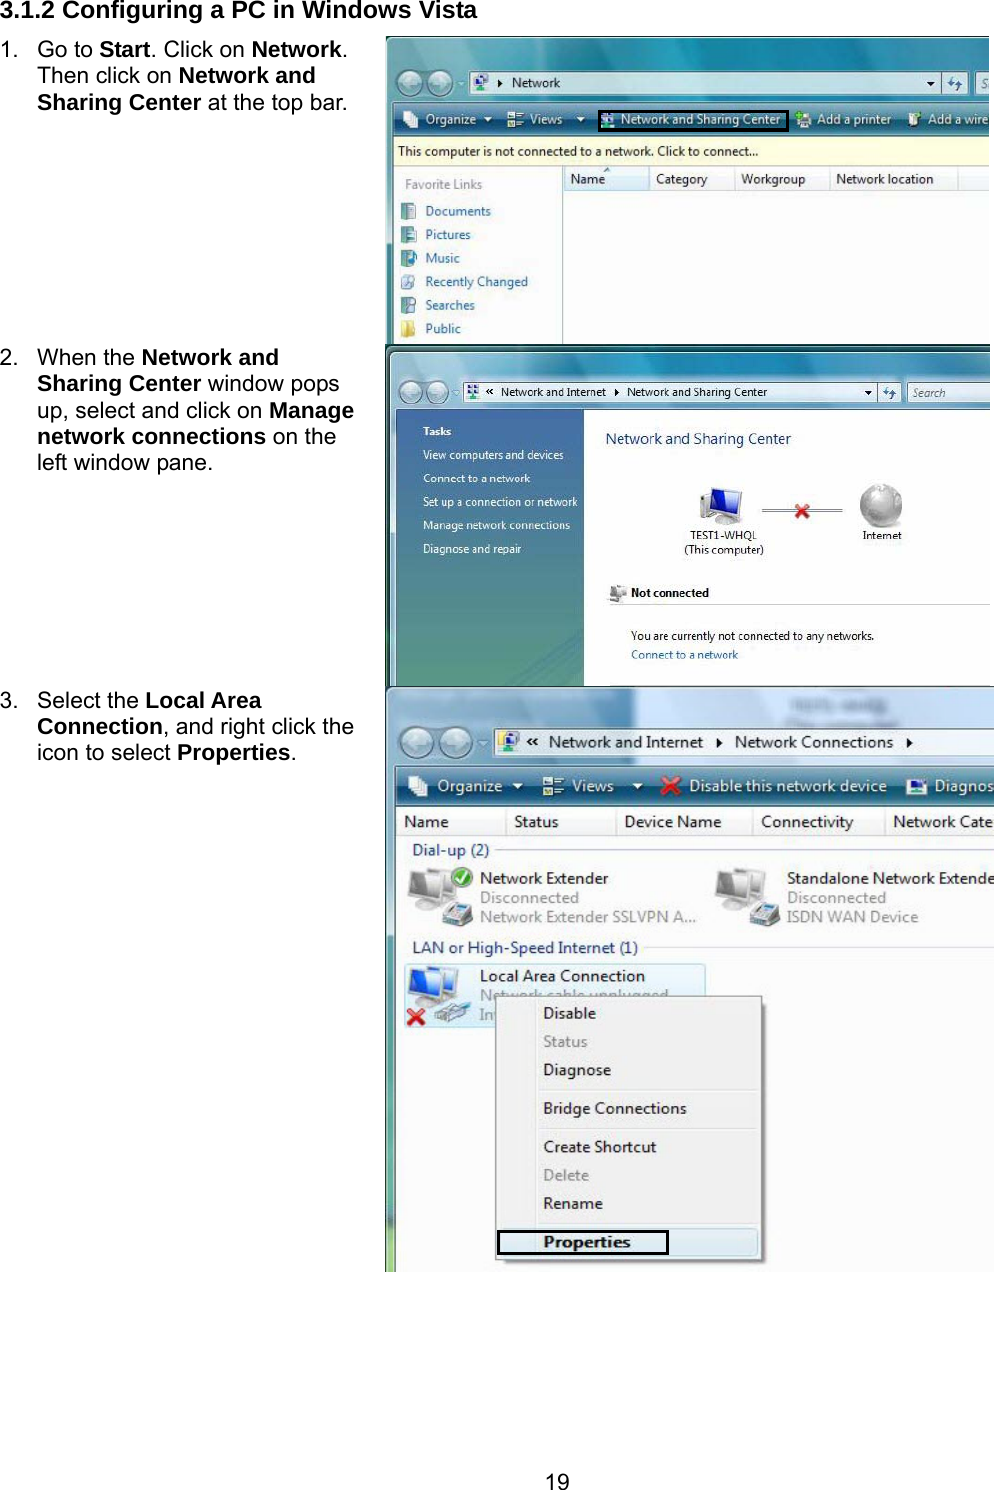 19 3.1.2 Configuring a PC in Windows Vista 1. Go to Start. Click on Network. Then click on Network and Sharing Center at the top bar. 2. When the Network and Sharing Center window pops up, select and click on Manage network connections on the left window pane. 3. Select the Local Area Connection, and right click the icon to select Properties. 